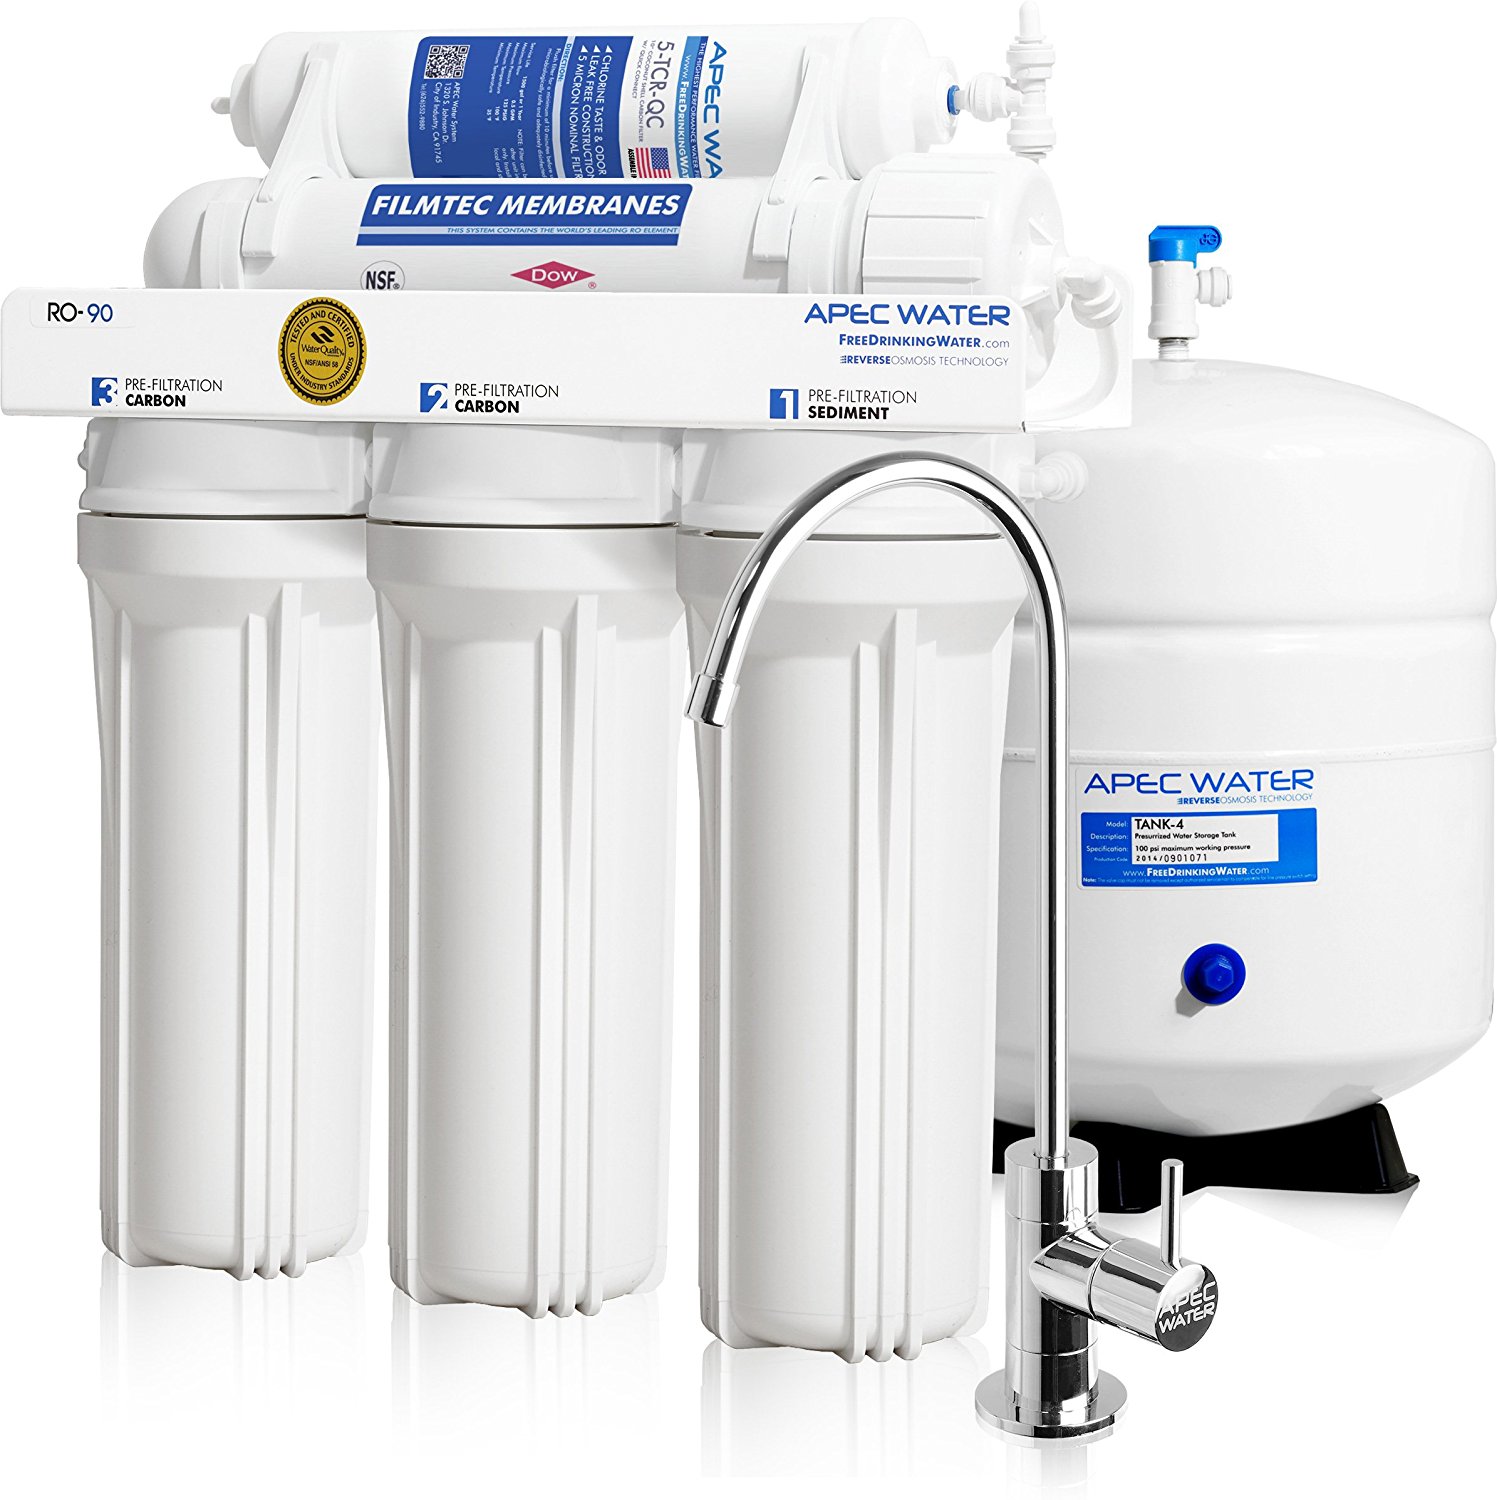 Choose the Best Water Filter with Reviews from Online